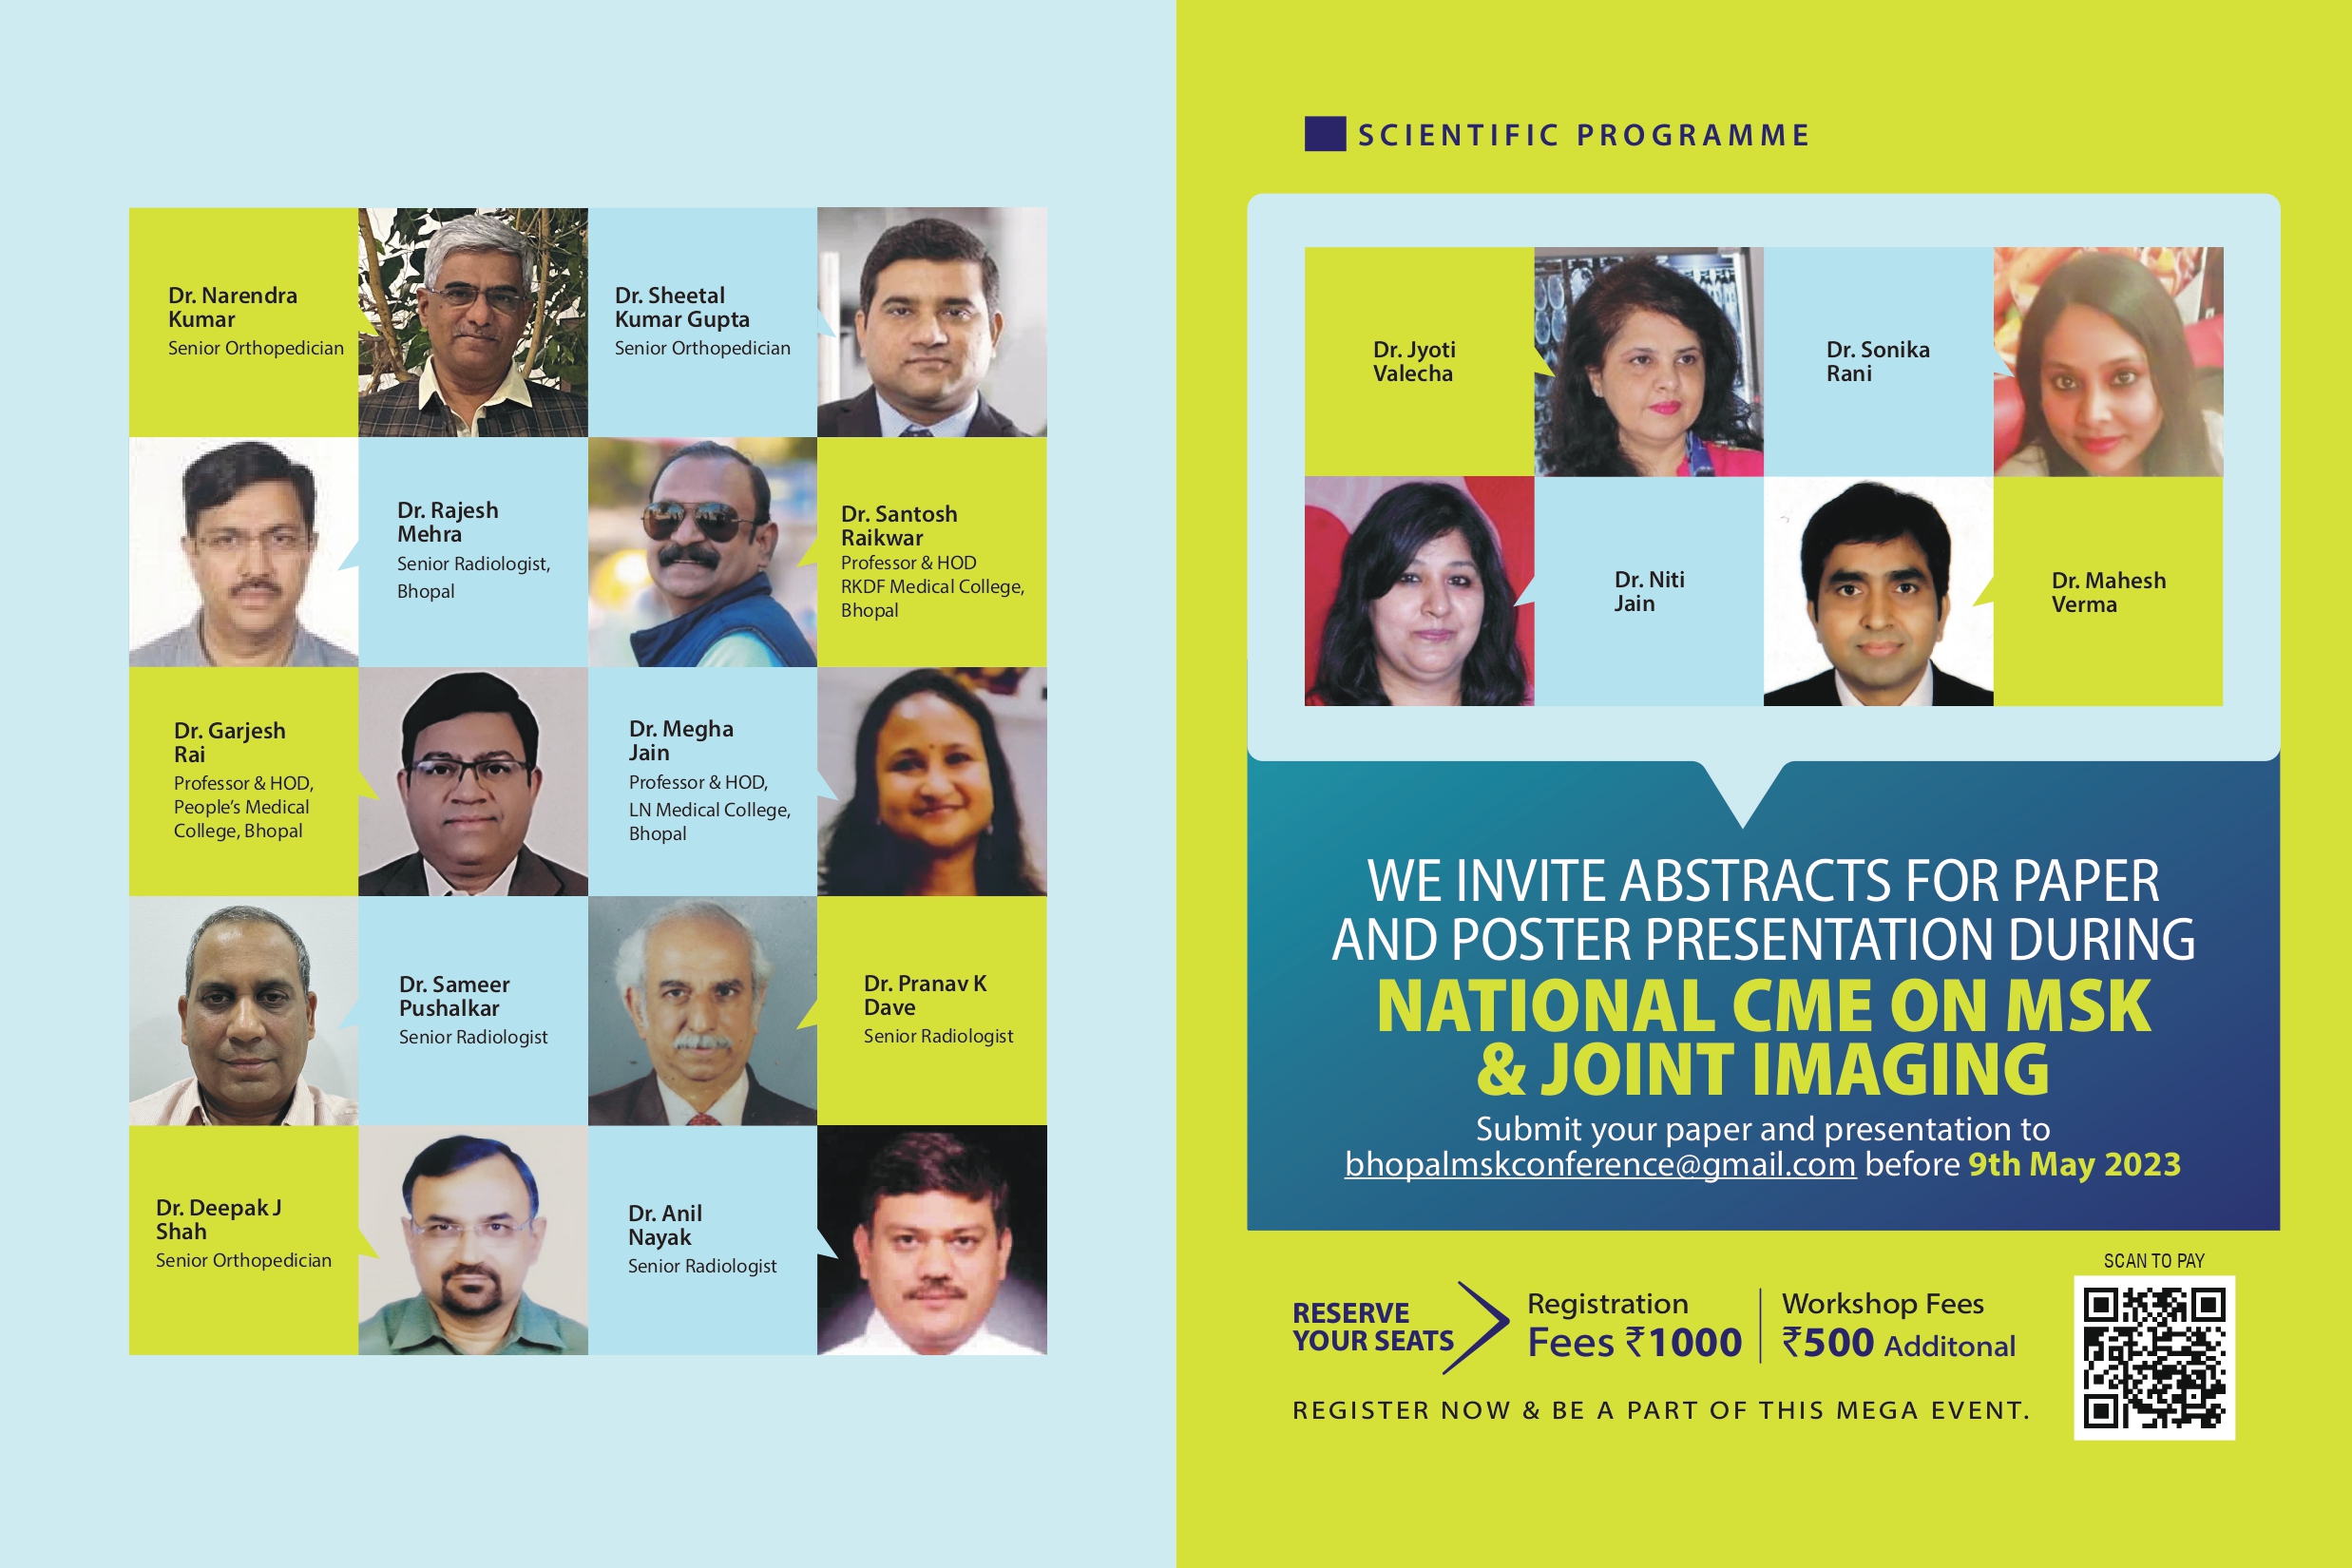 National CME ON MSK & joint imaging